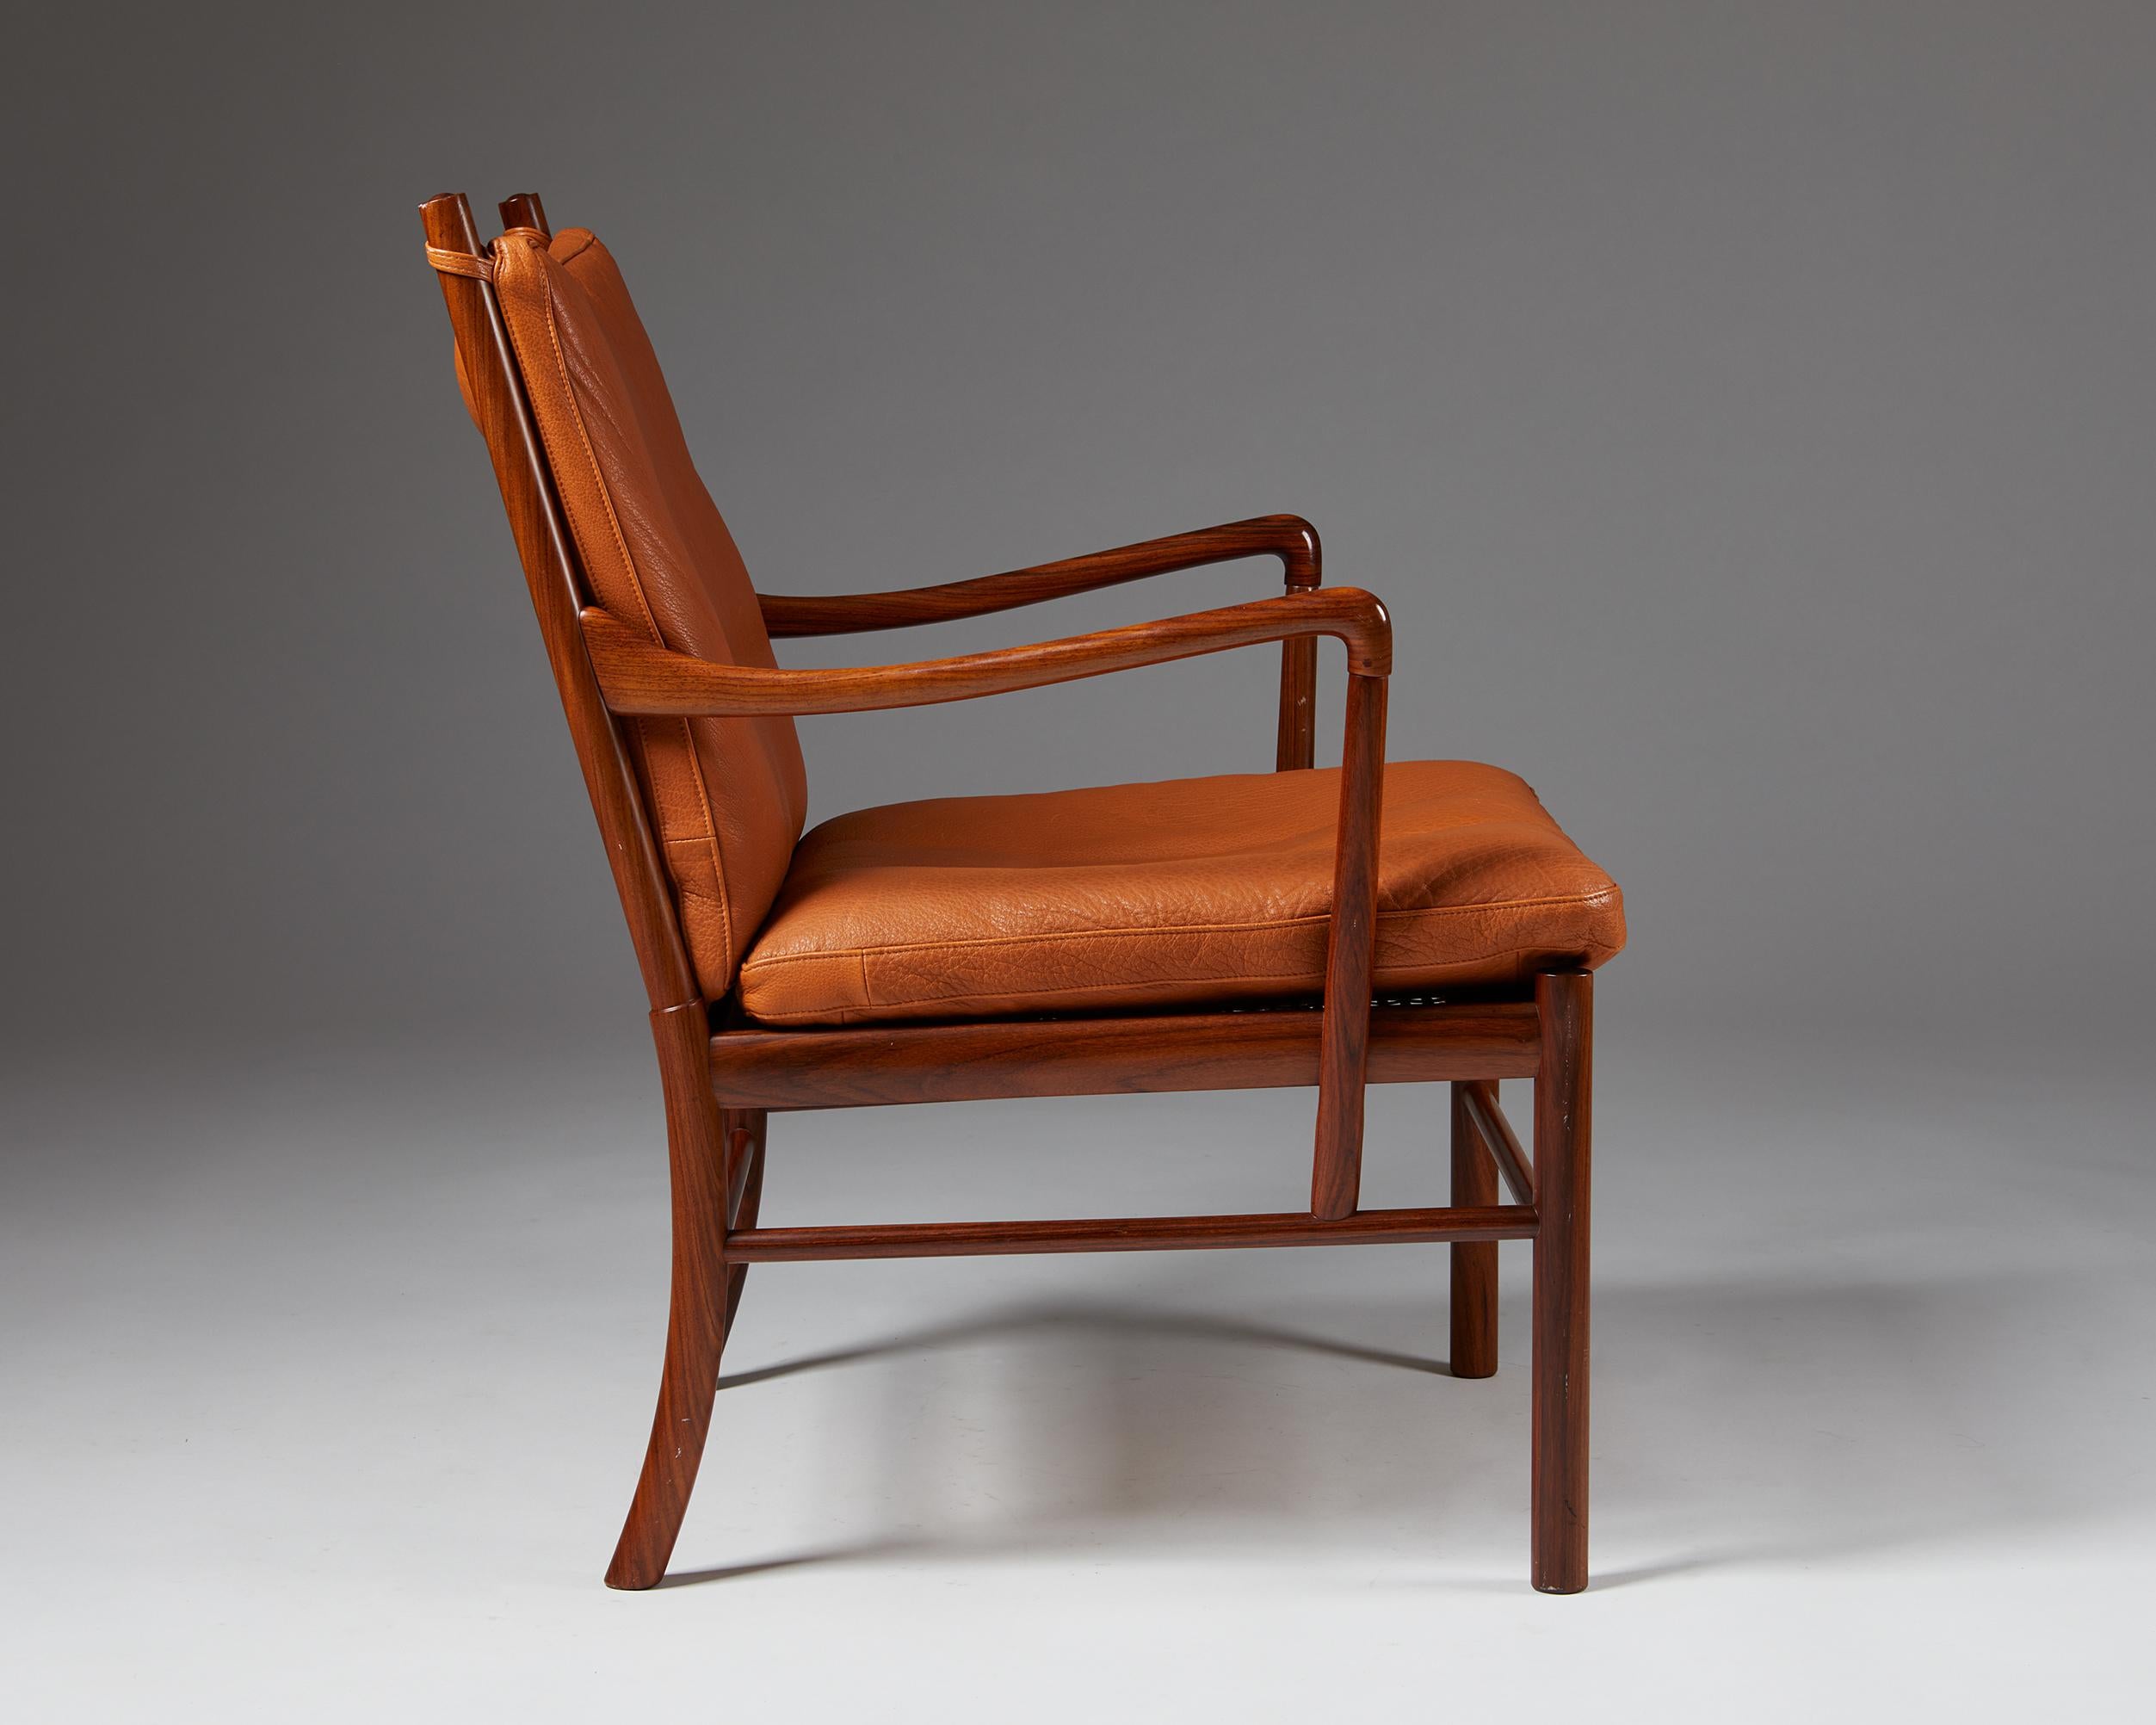 20th Century Colonial Chair Designed by Ole Wanscher, Manufactured by P Jeppesen